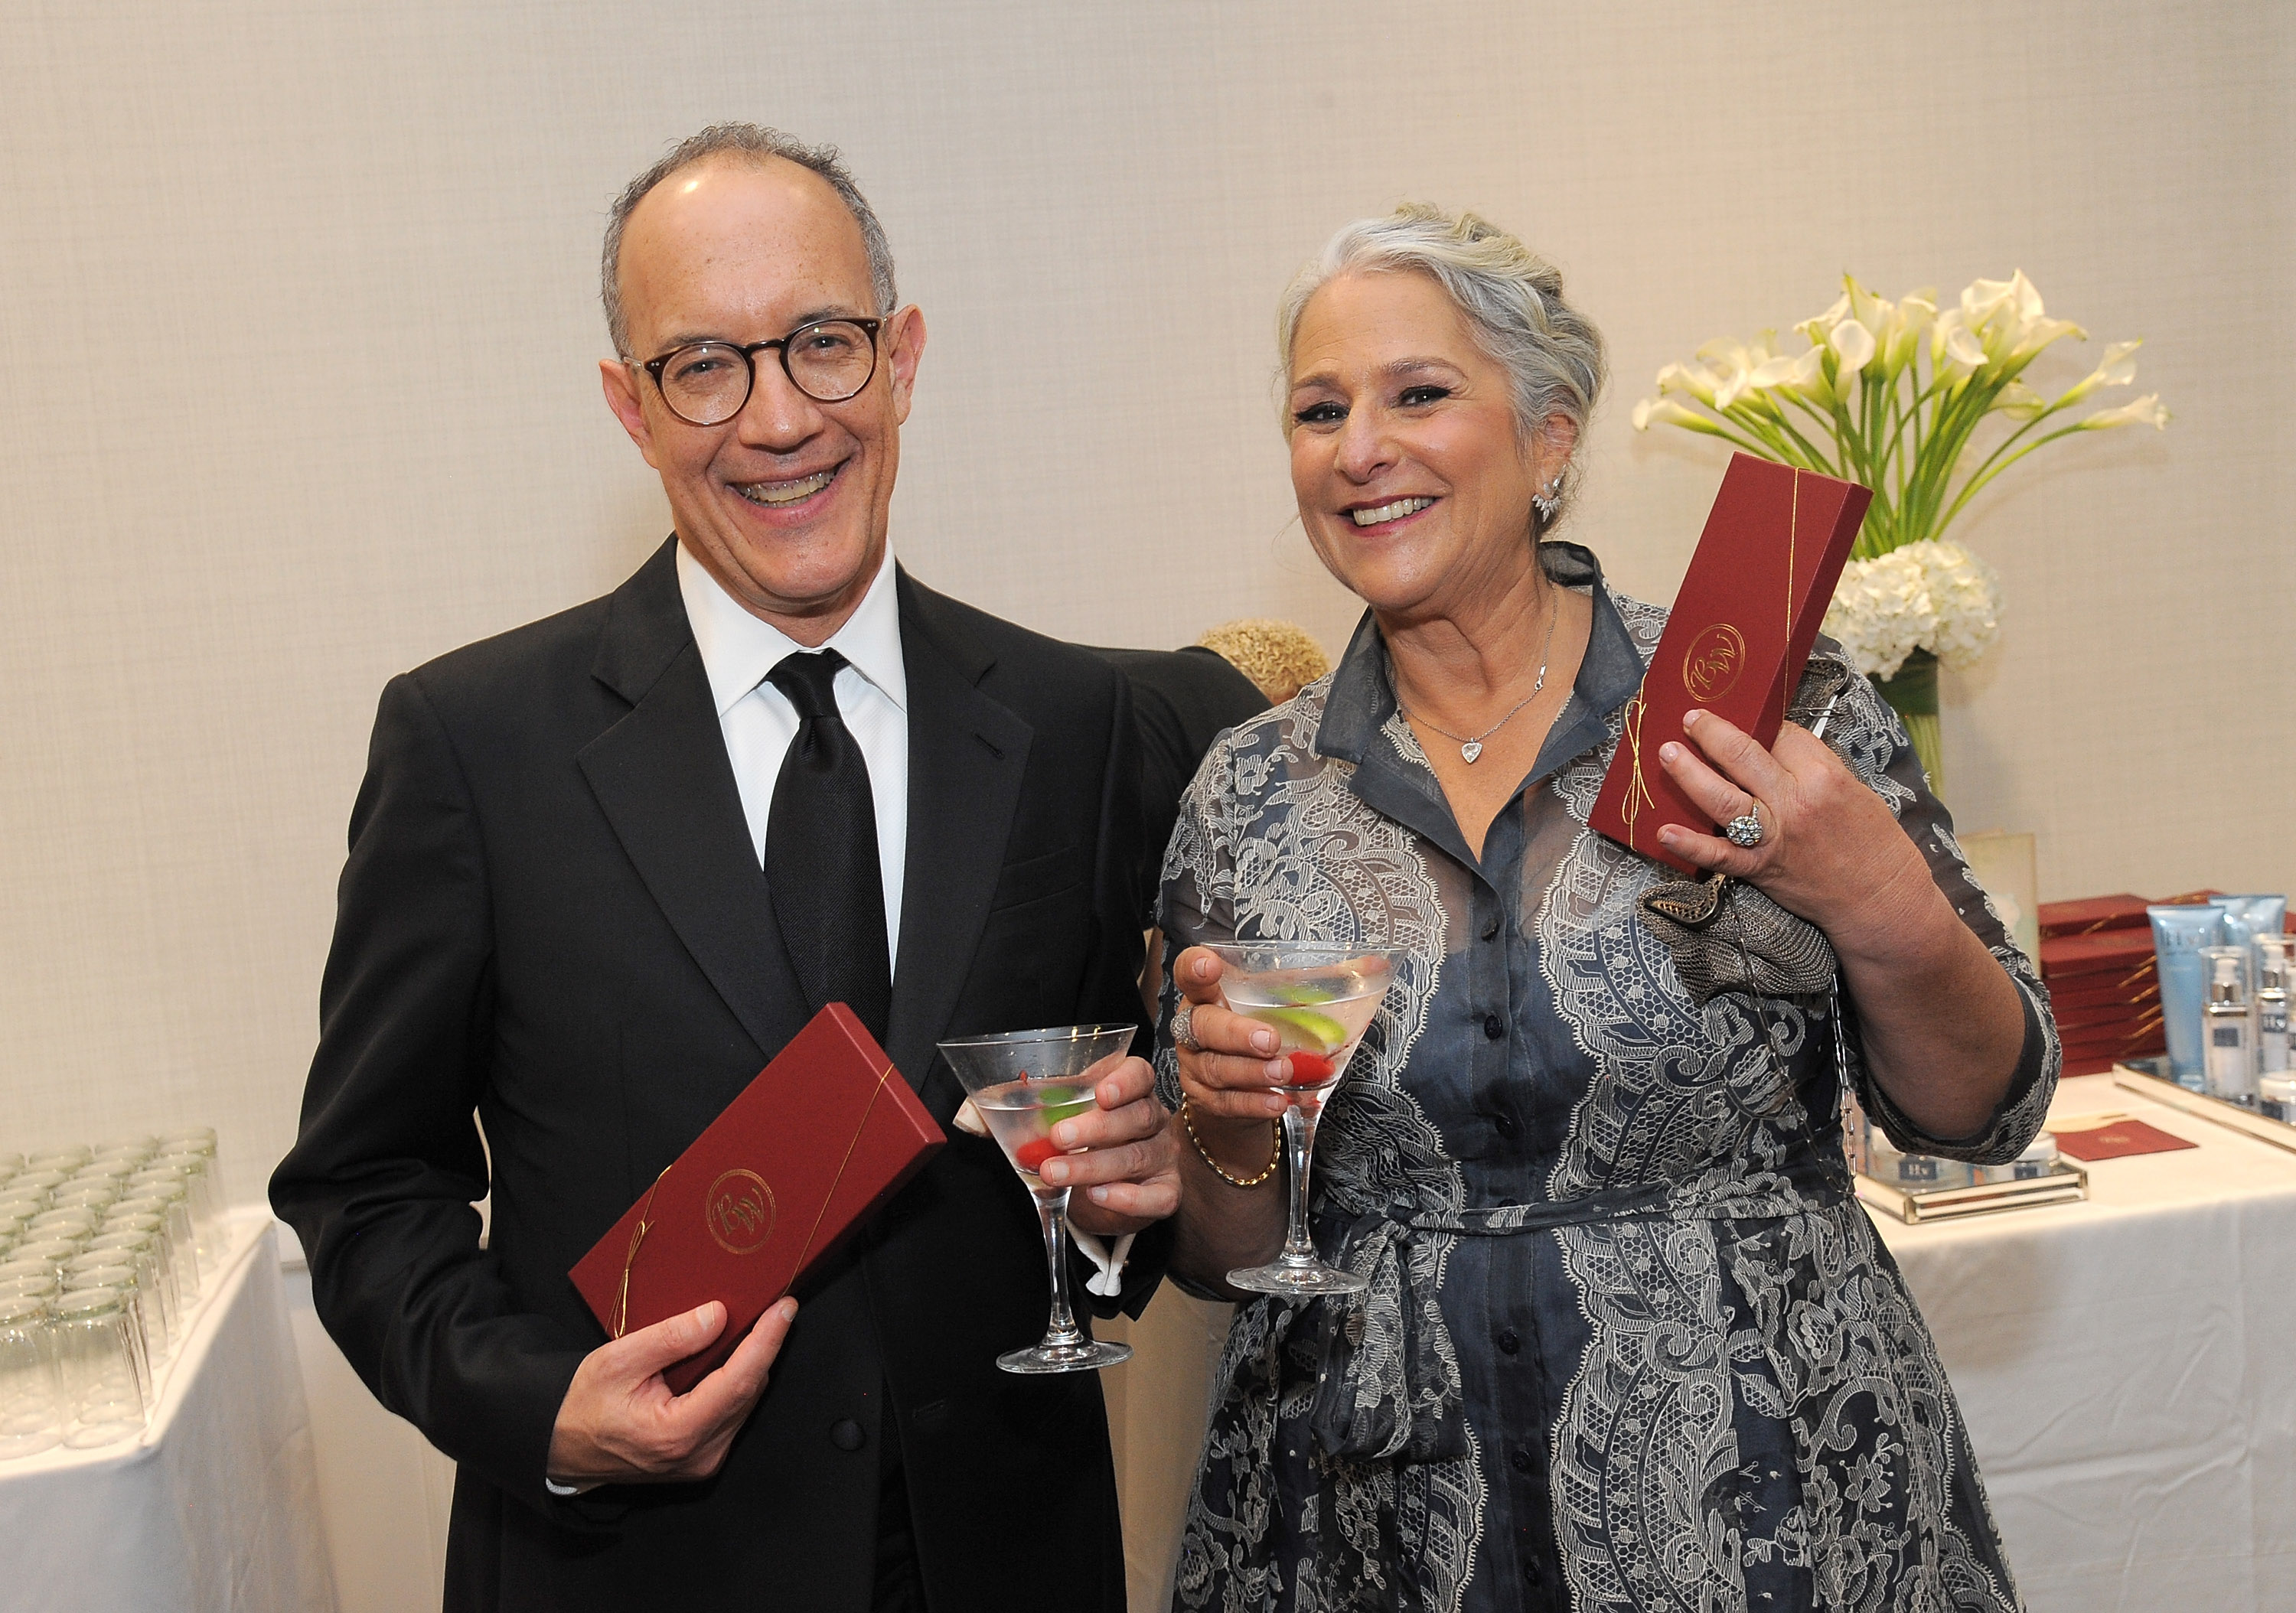 David Crane and Marta Kauffman attend the Backstage Creations Celebrity Retreat at The 2016 Writers Guild West Awards